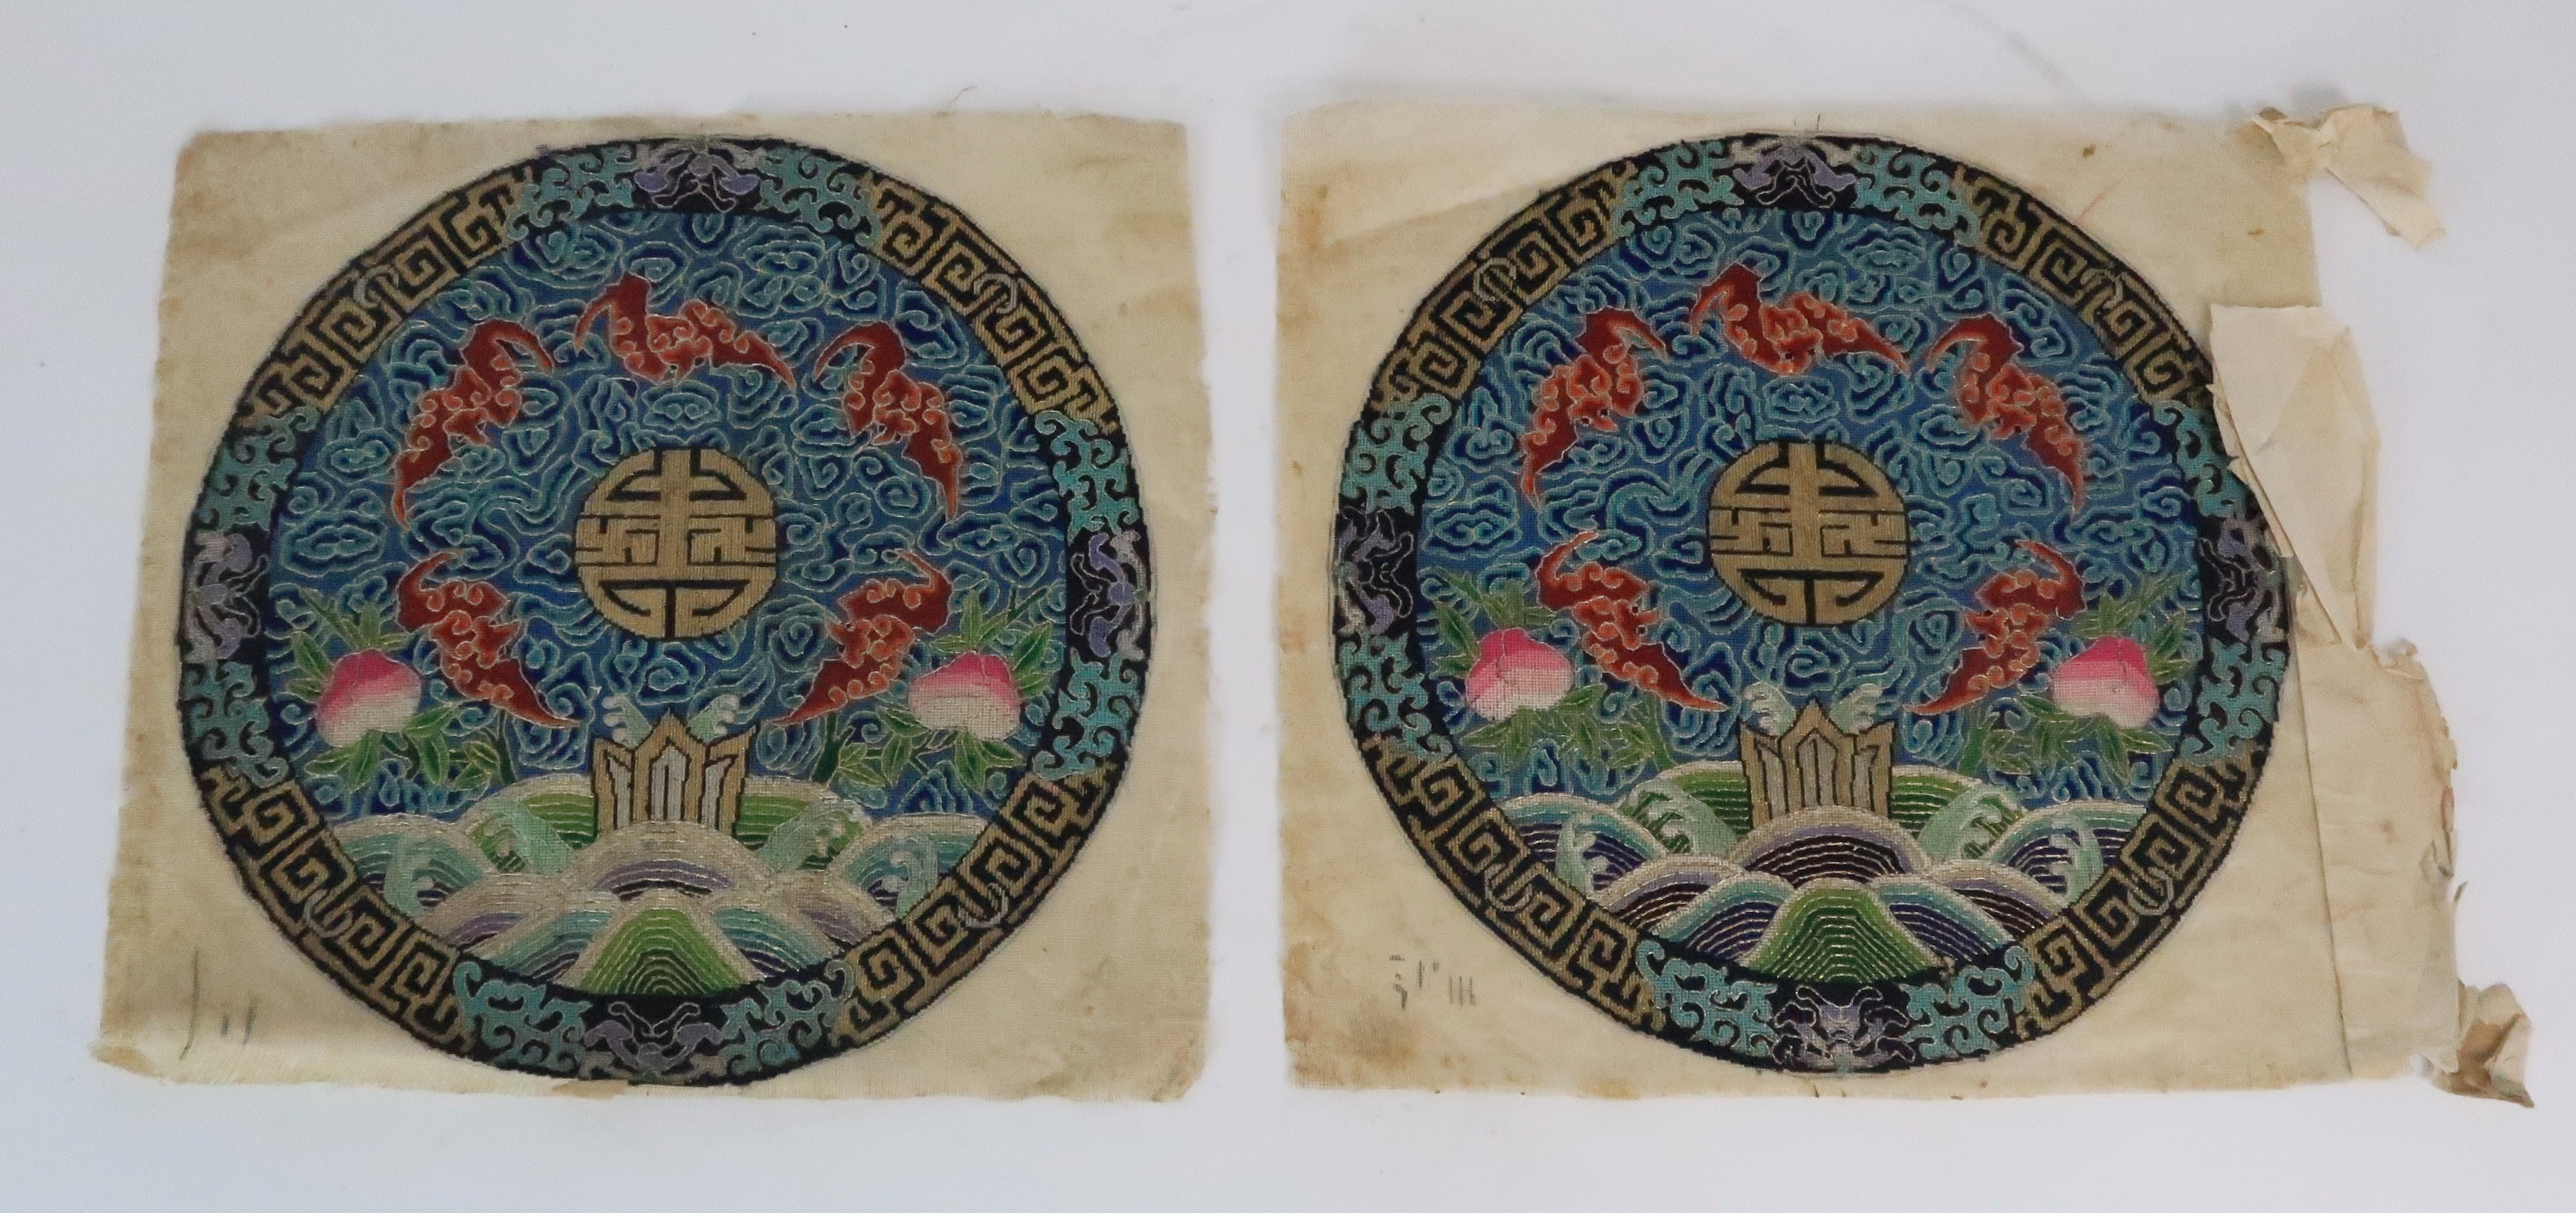 *WITHDRAWN* A PAIR OF CHINESE SILK AND METAL THREAD ROUNDELS with Fu symbol for longevity